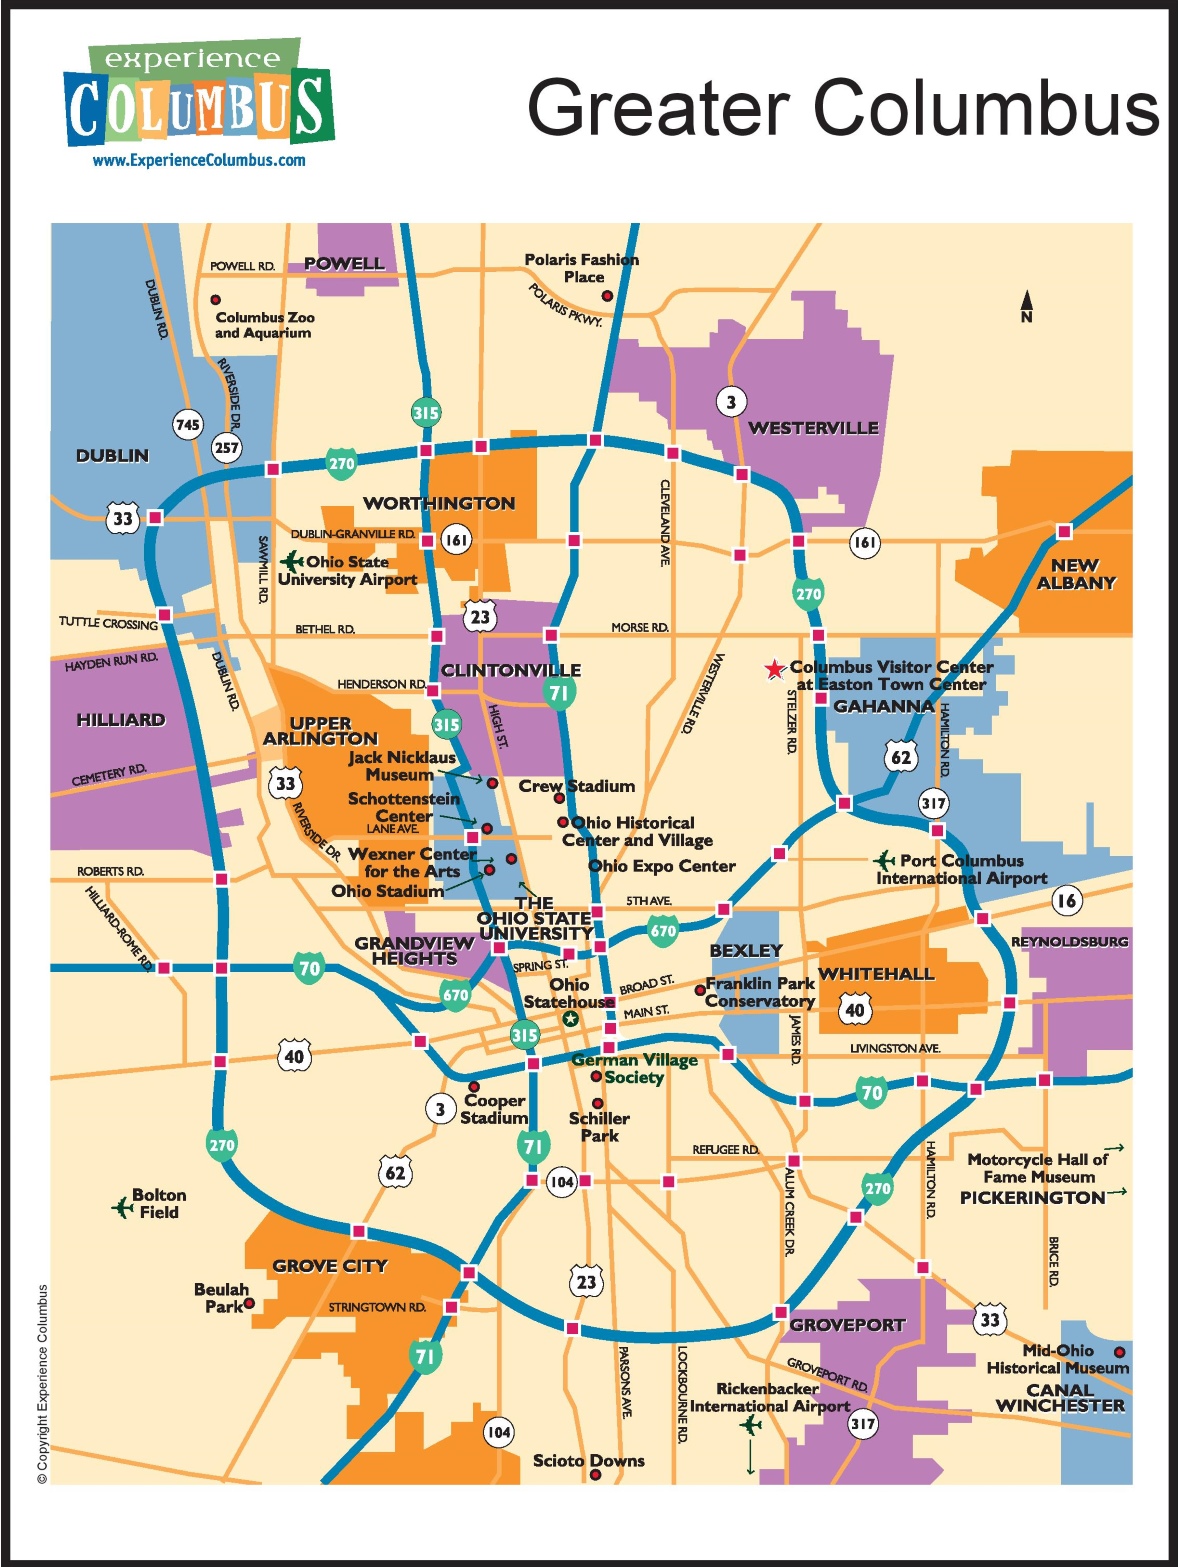 A map of Greater Columbus which highlights the major roads, neighborhoods, and towns around Columbus.